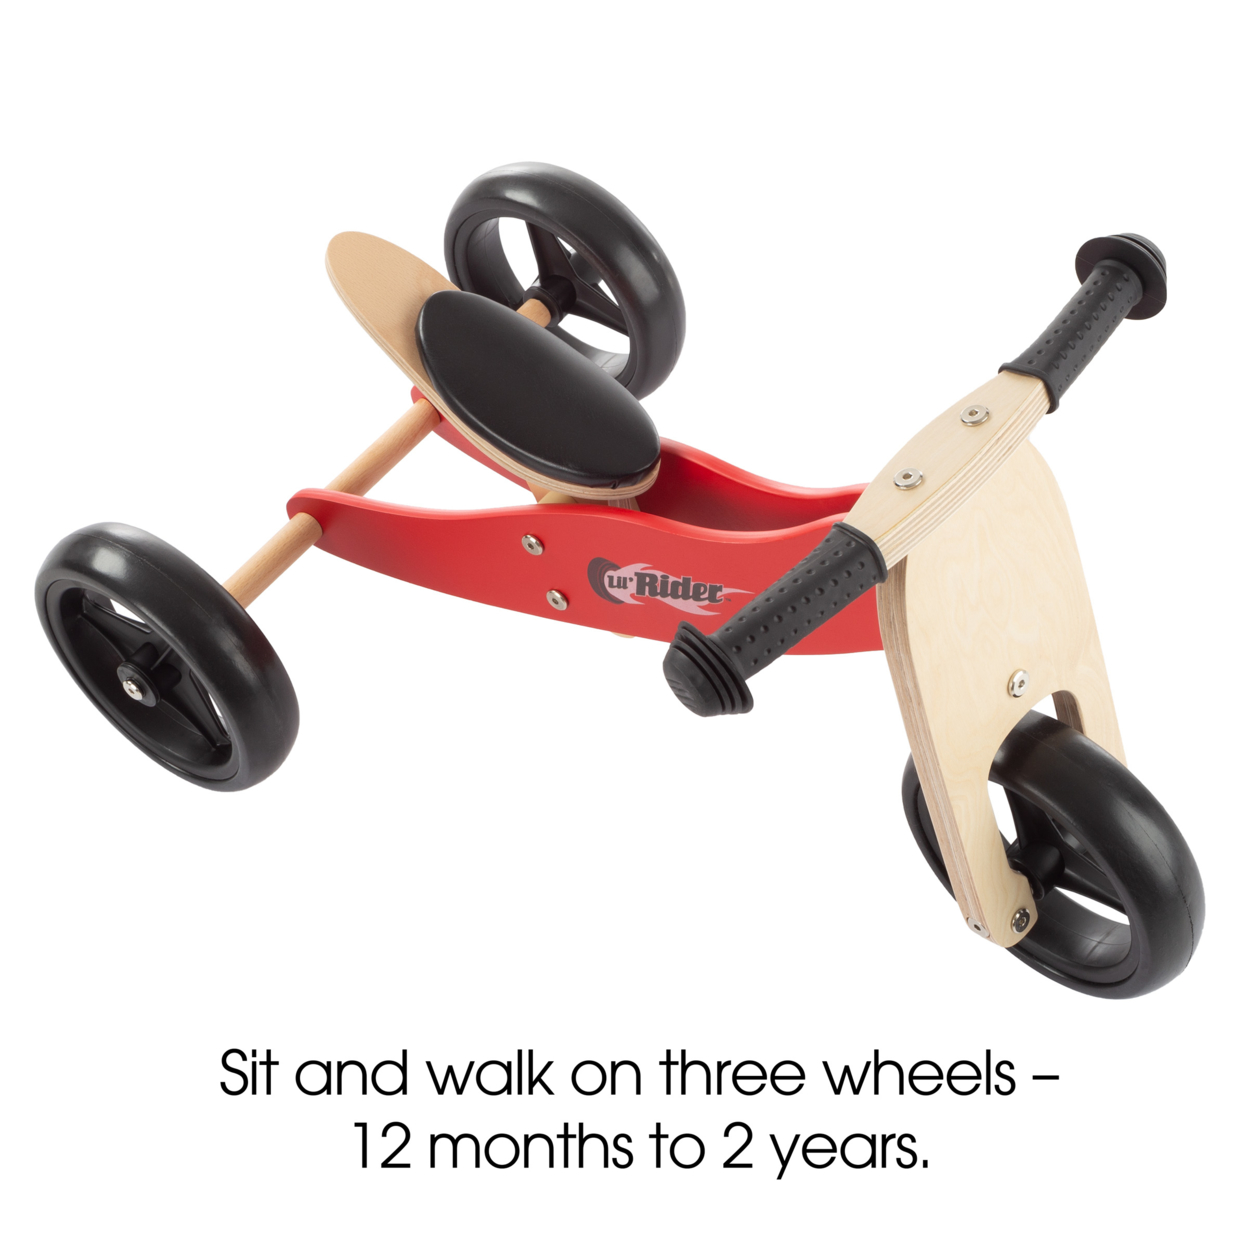 2-in-1 Wooden Balance Bike & Push Tricycle- Ride-On Toy With Easy Grip Handles, No Pedals, Rubber Wheels For Boys And Girls